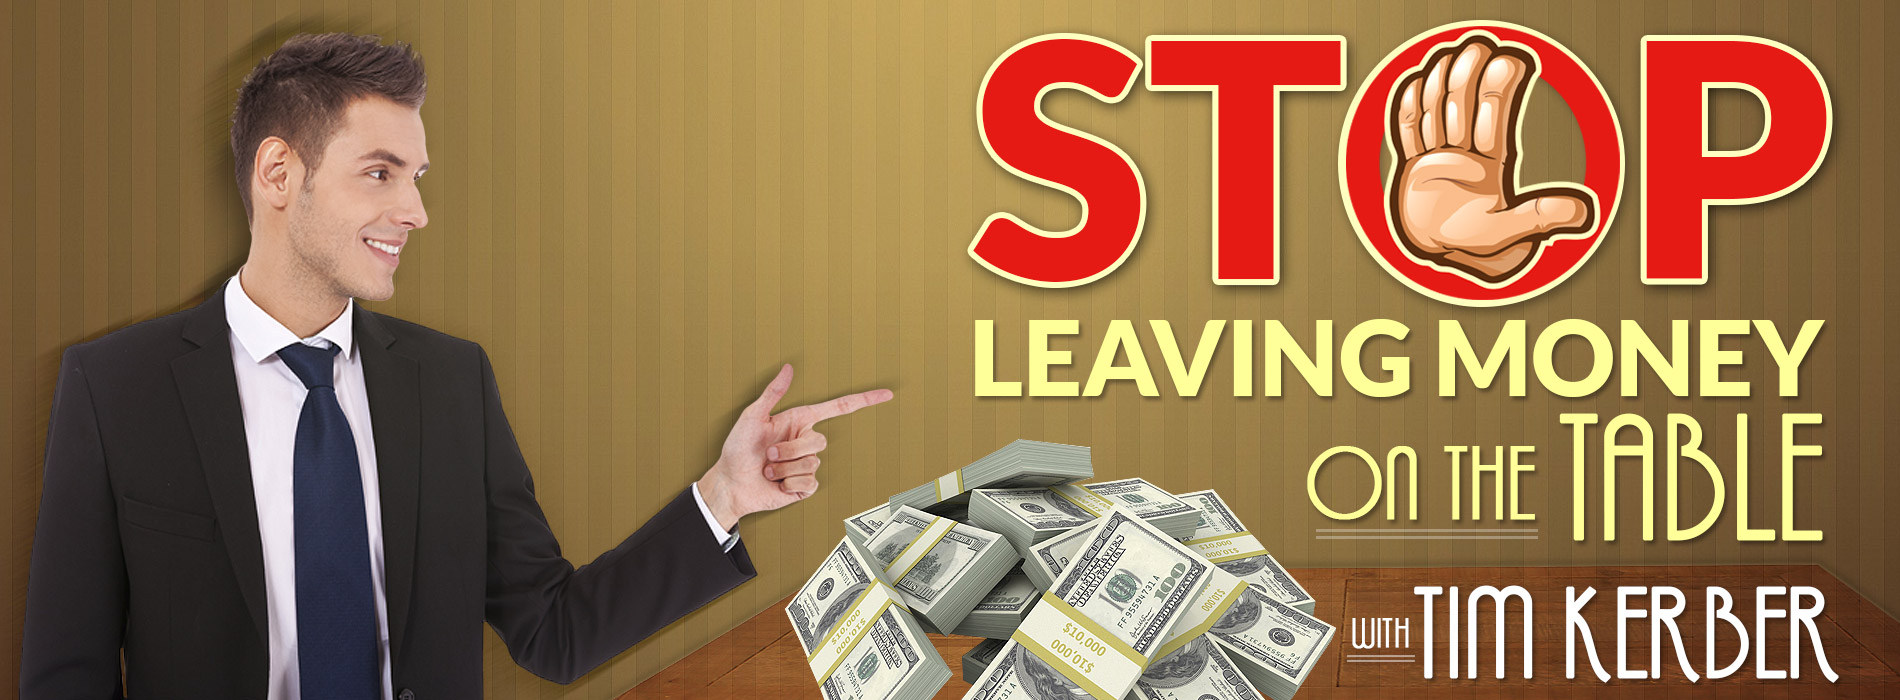 stop-leaving-money- on the table